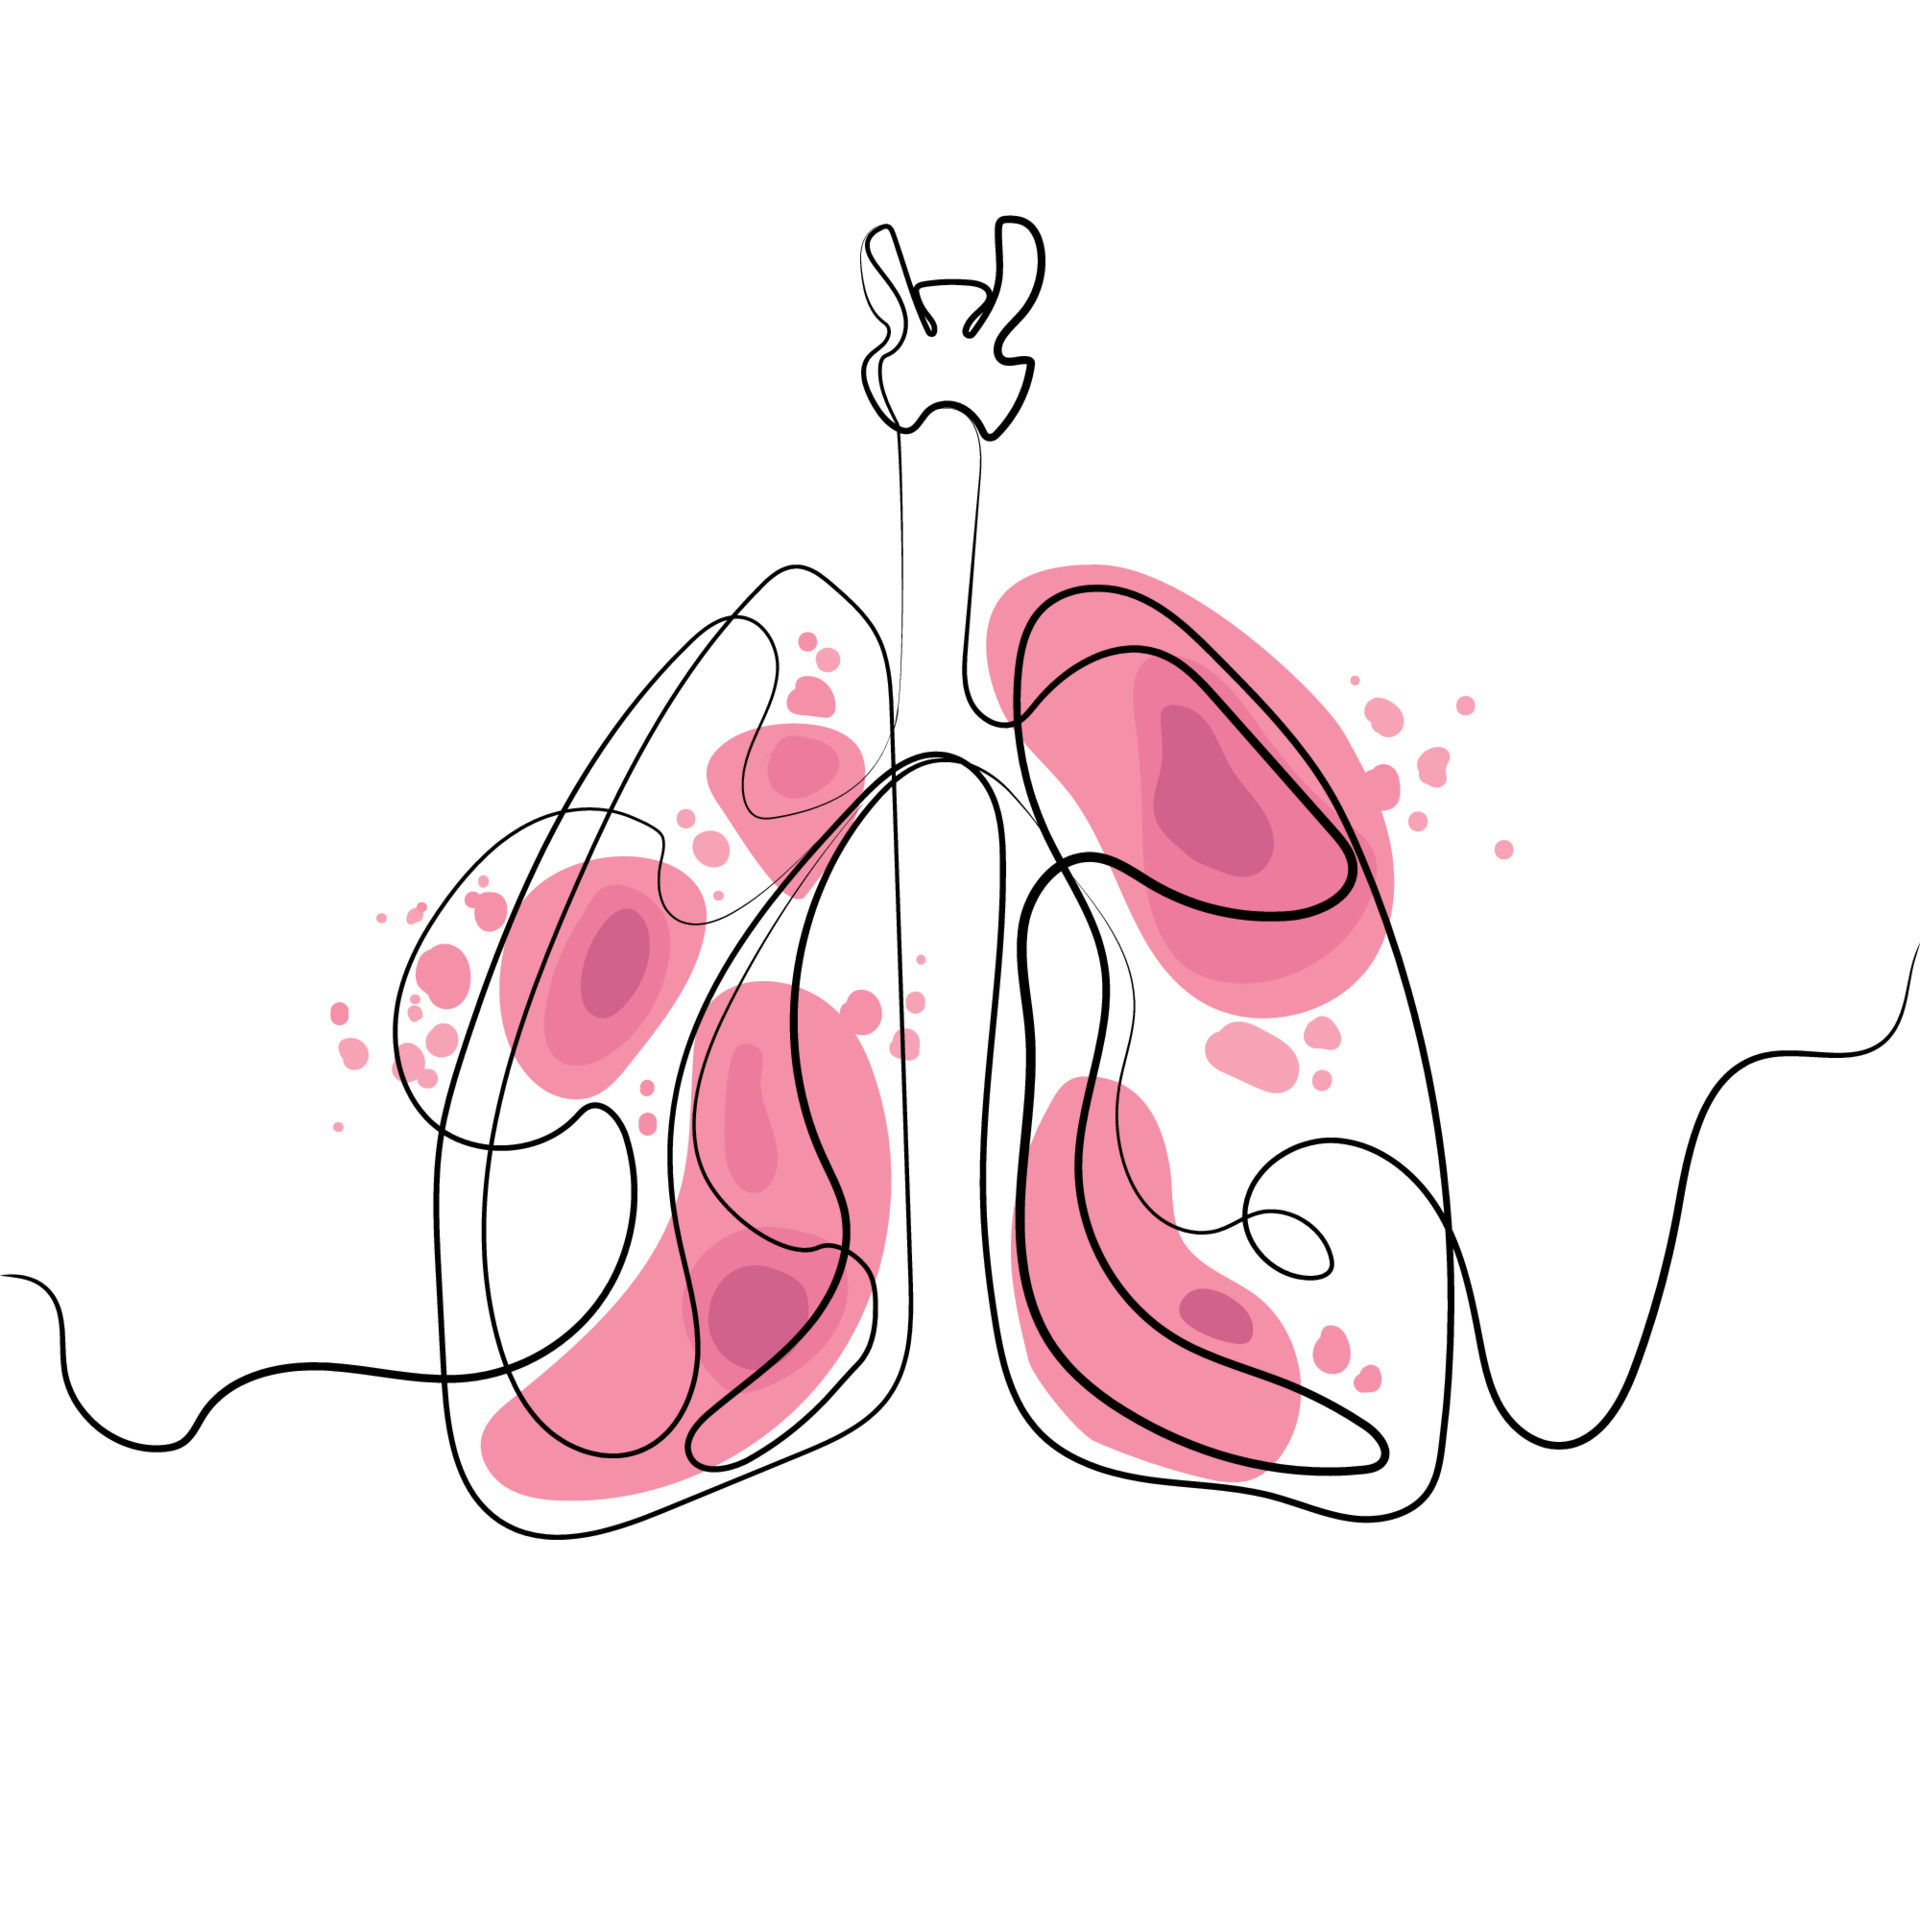 4100 Lung Drawing Stock Photos Pictures  RoyaltyFree Images  iStock   Lungs Lung sketch Human lungs